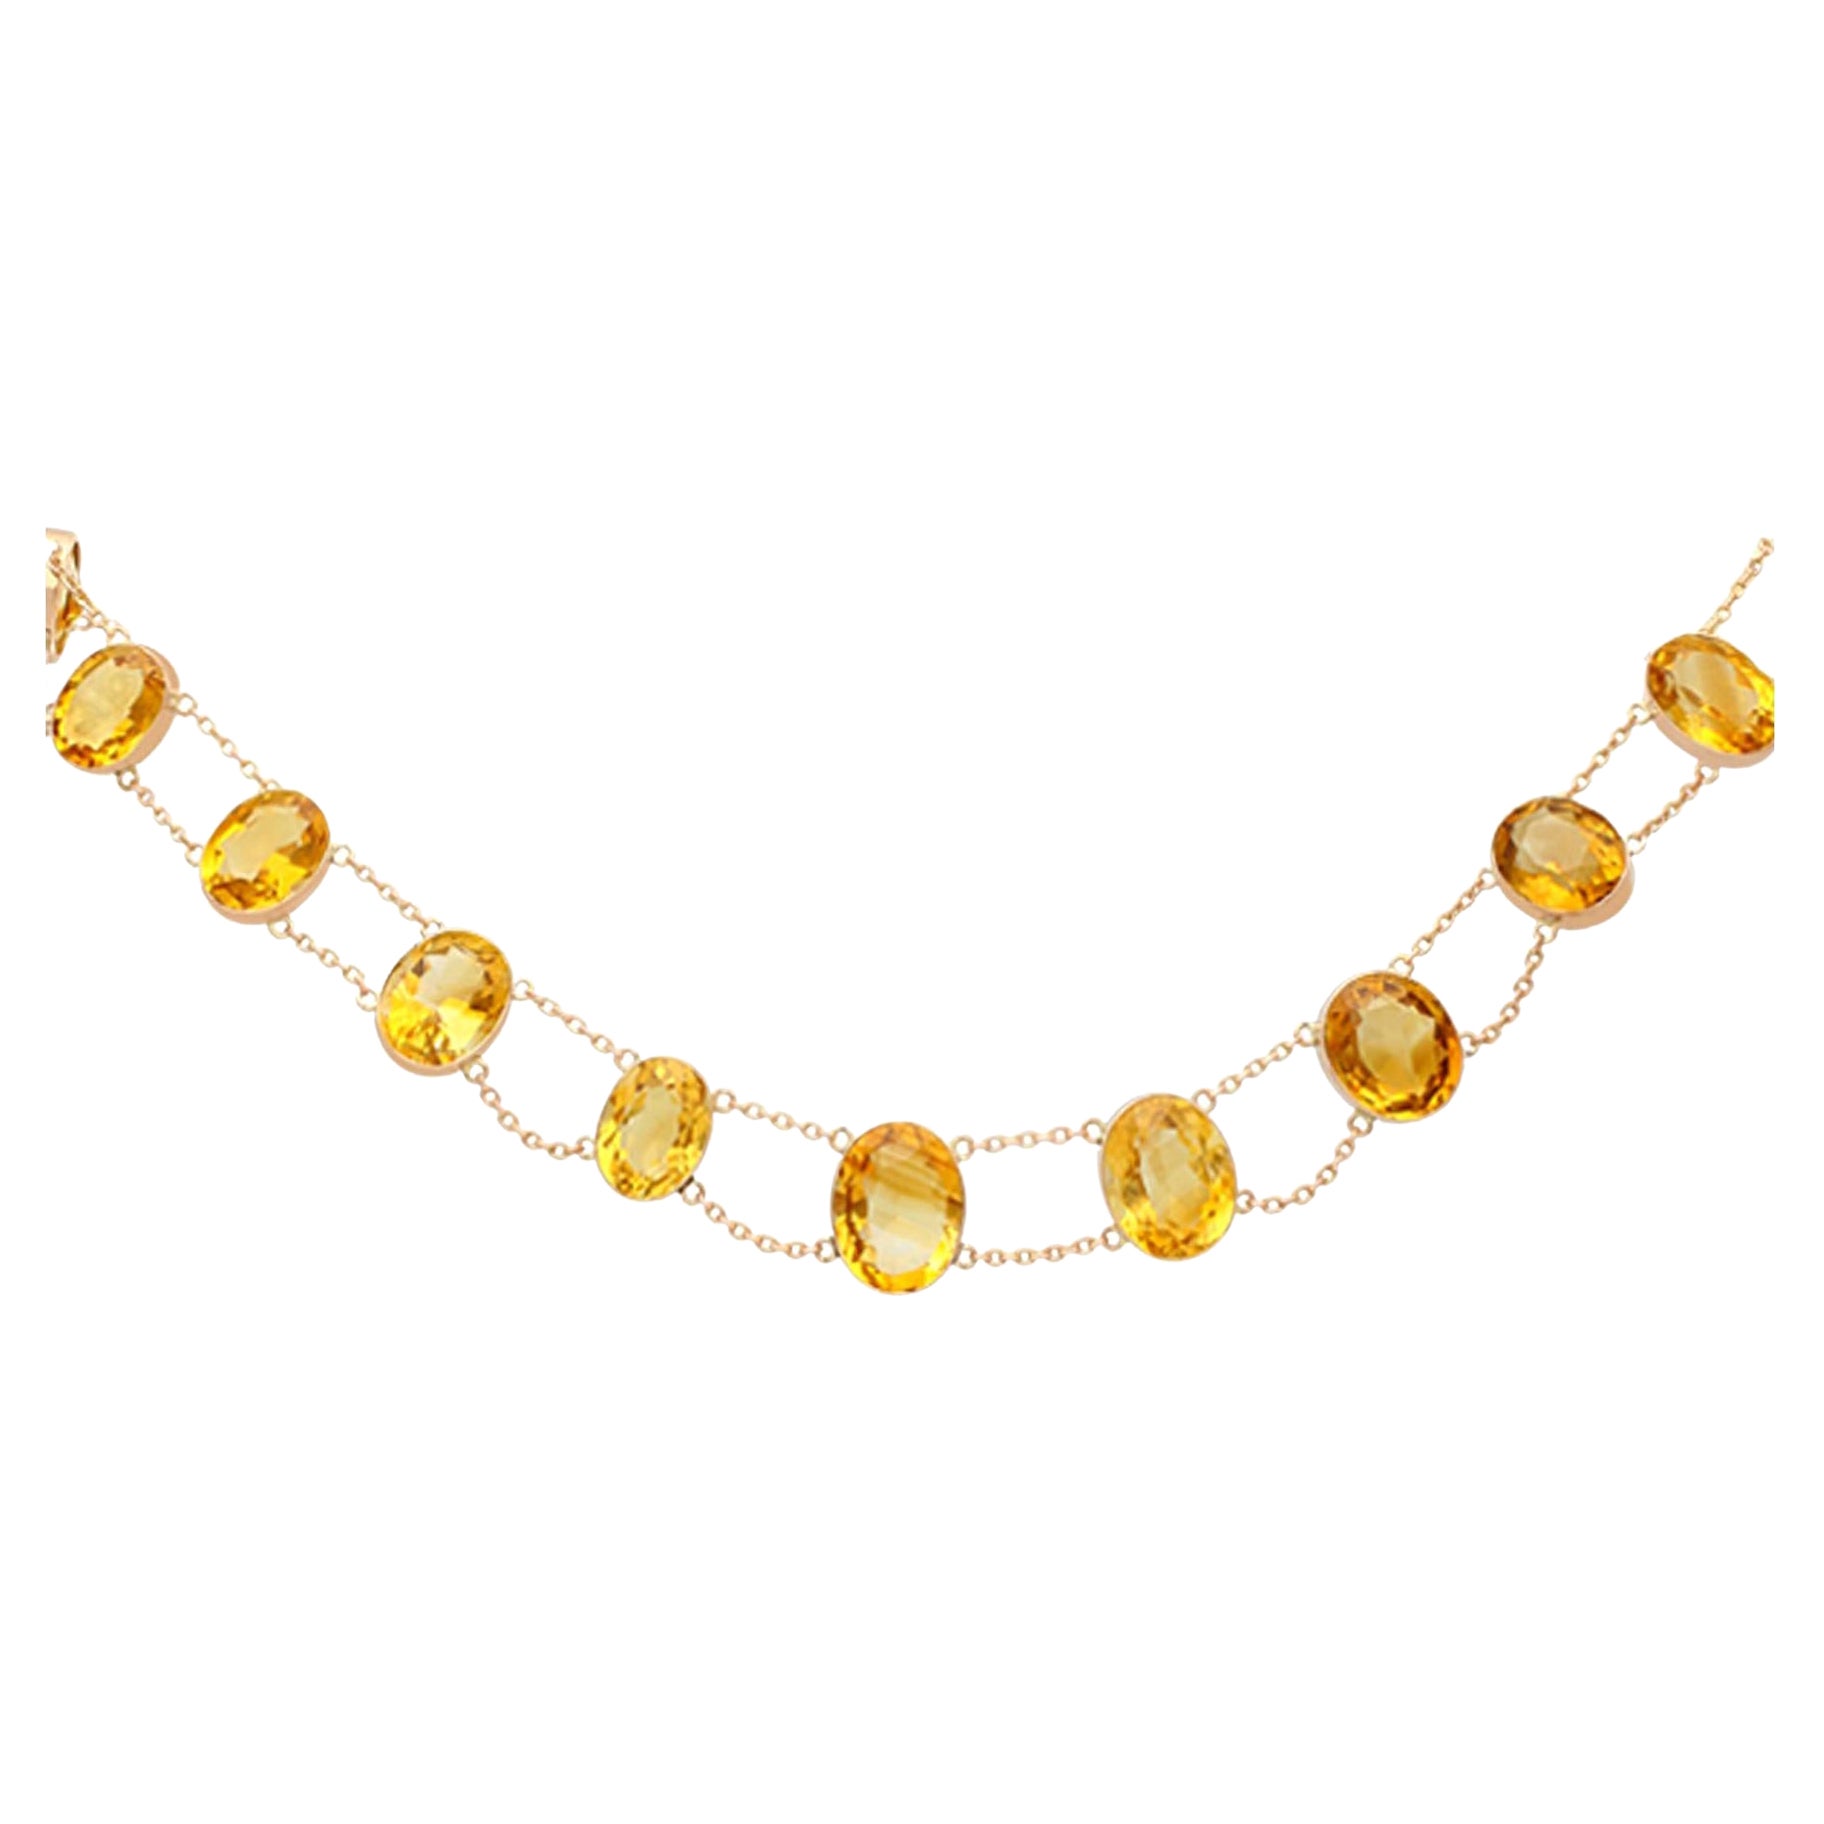 Antique 124.21ct Citrine and Rose Gold Riviere Necklace